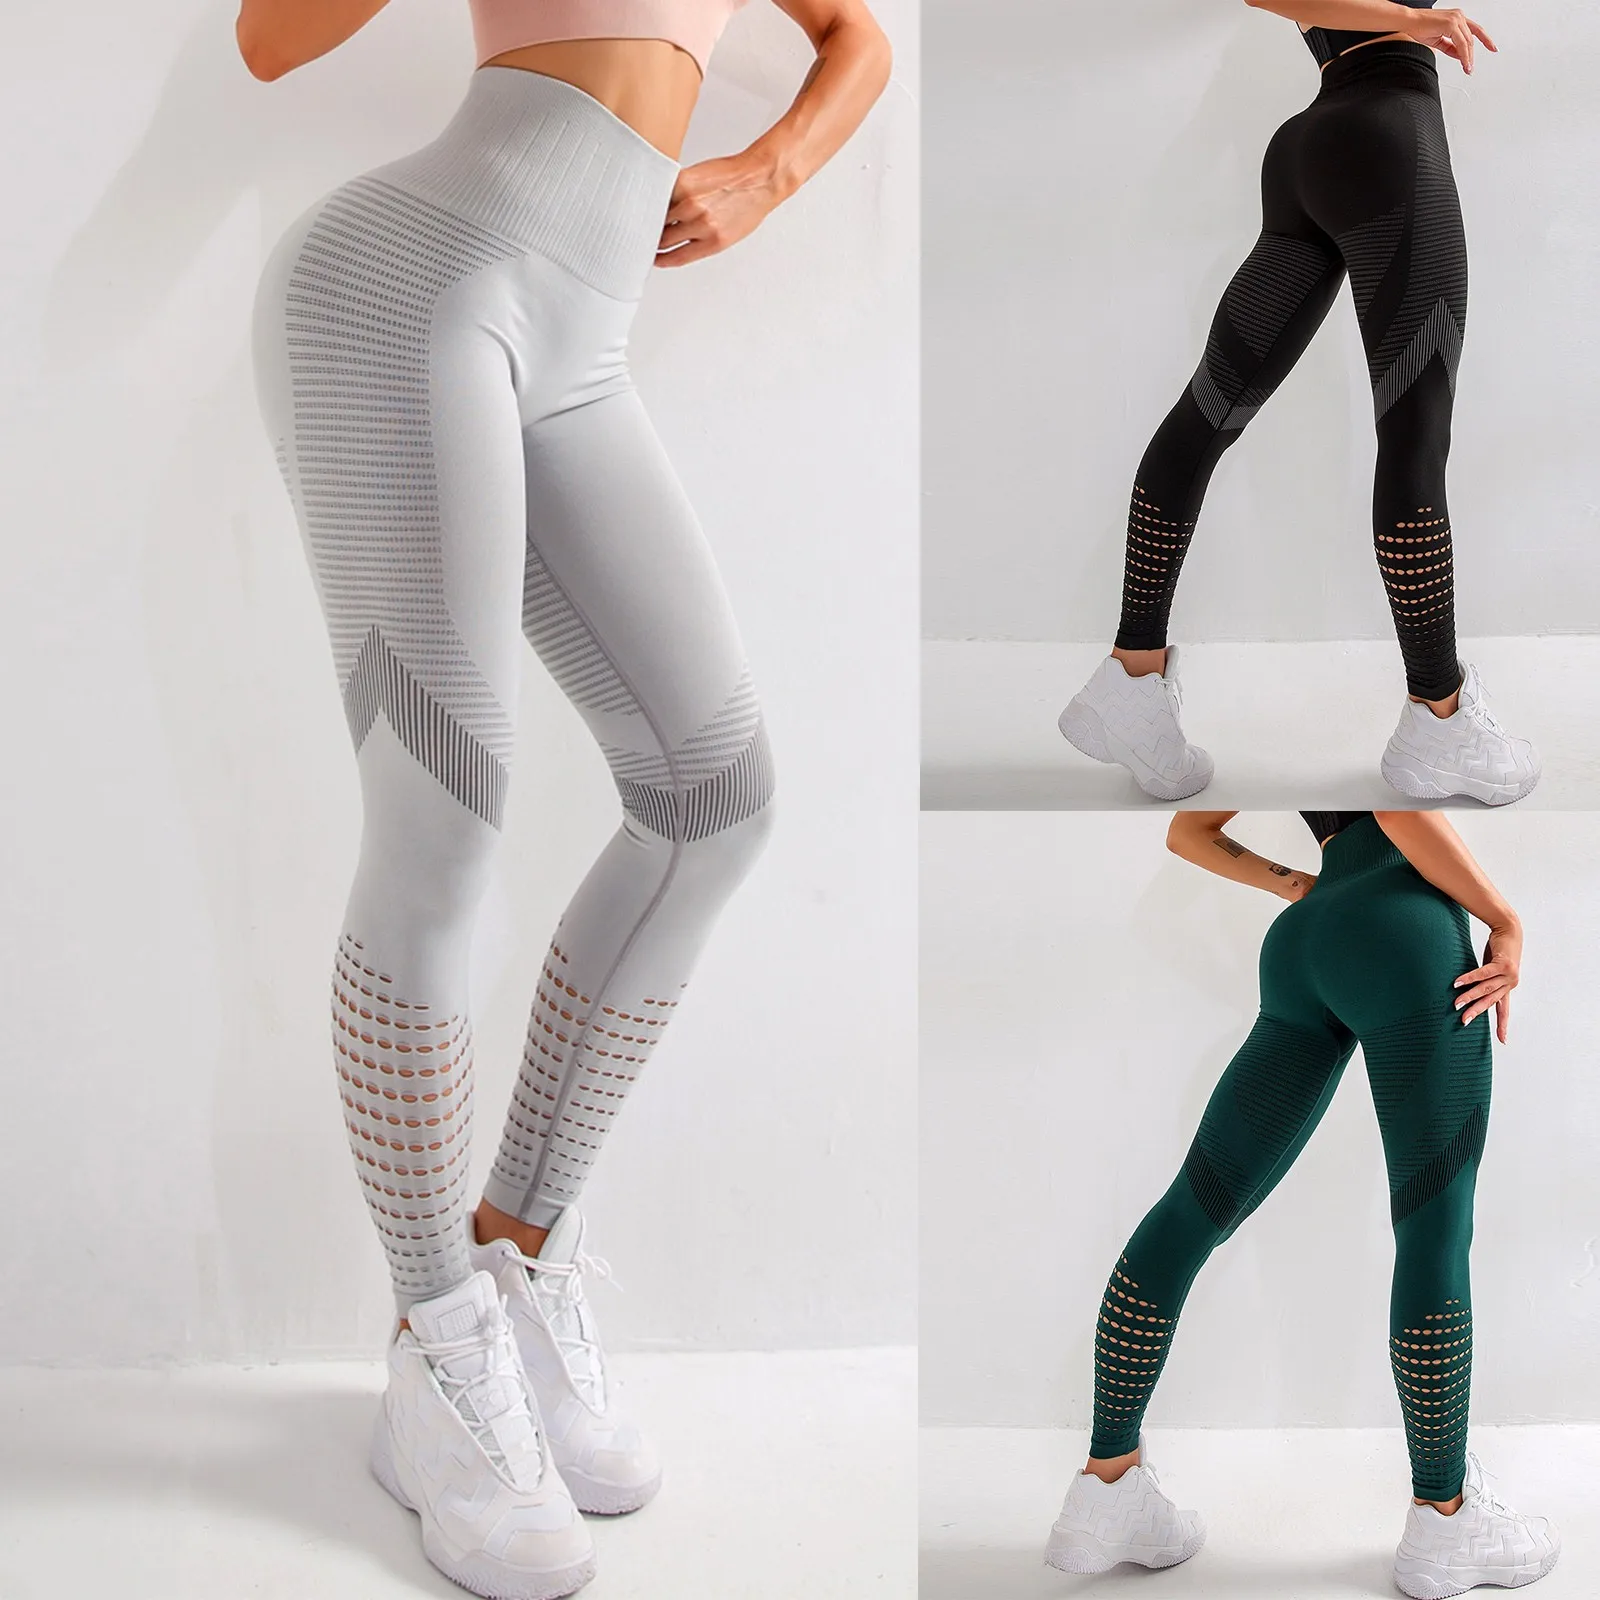 

Printed Plus Size Legging Women Casual Stretchy Tight Push Up Sport Legging Running Pant Trouser Sexy High Waist Pants Z$Y